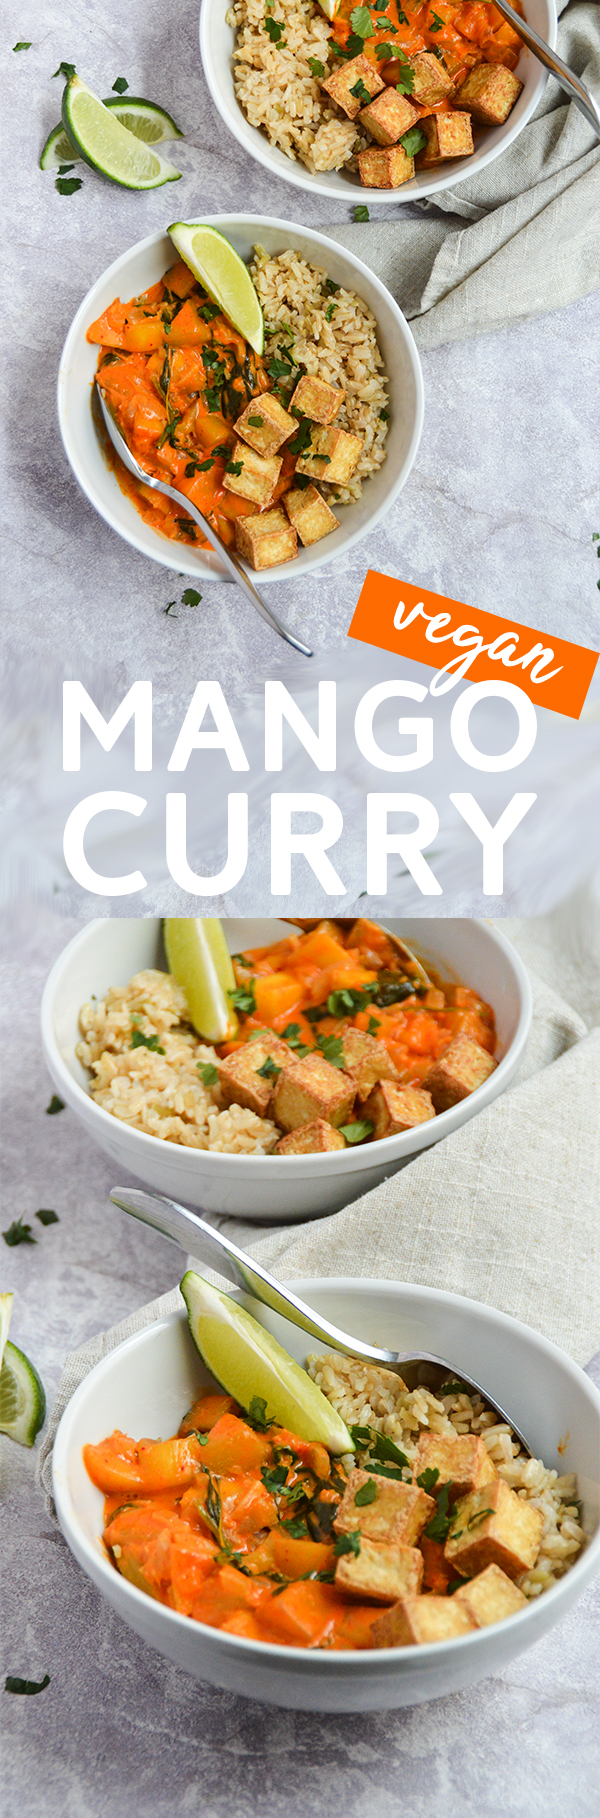 Vegan Mango Curry - This delicious mango curry recipe is easy to make and can be served over rice and with the protein of your choice (but go with tofu to keep it vegan). #curry #mango #vegan #veganrecipe #plantbased